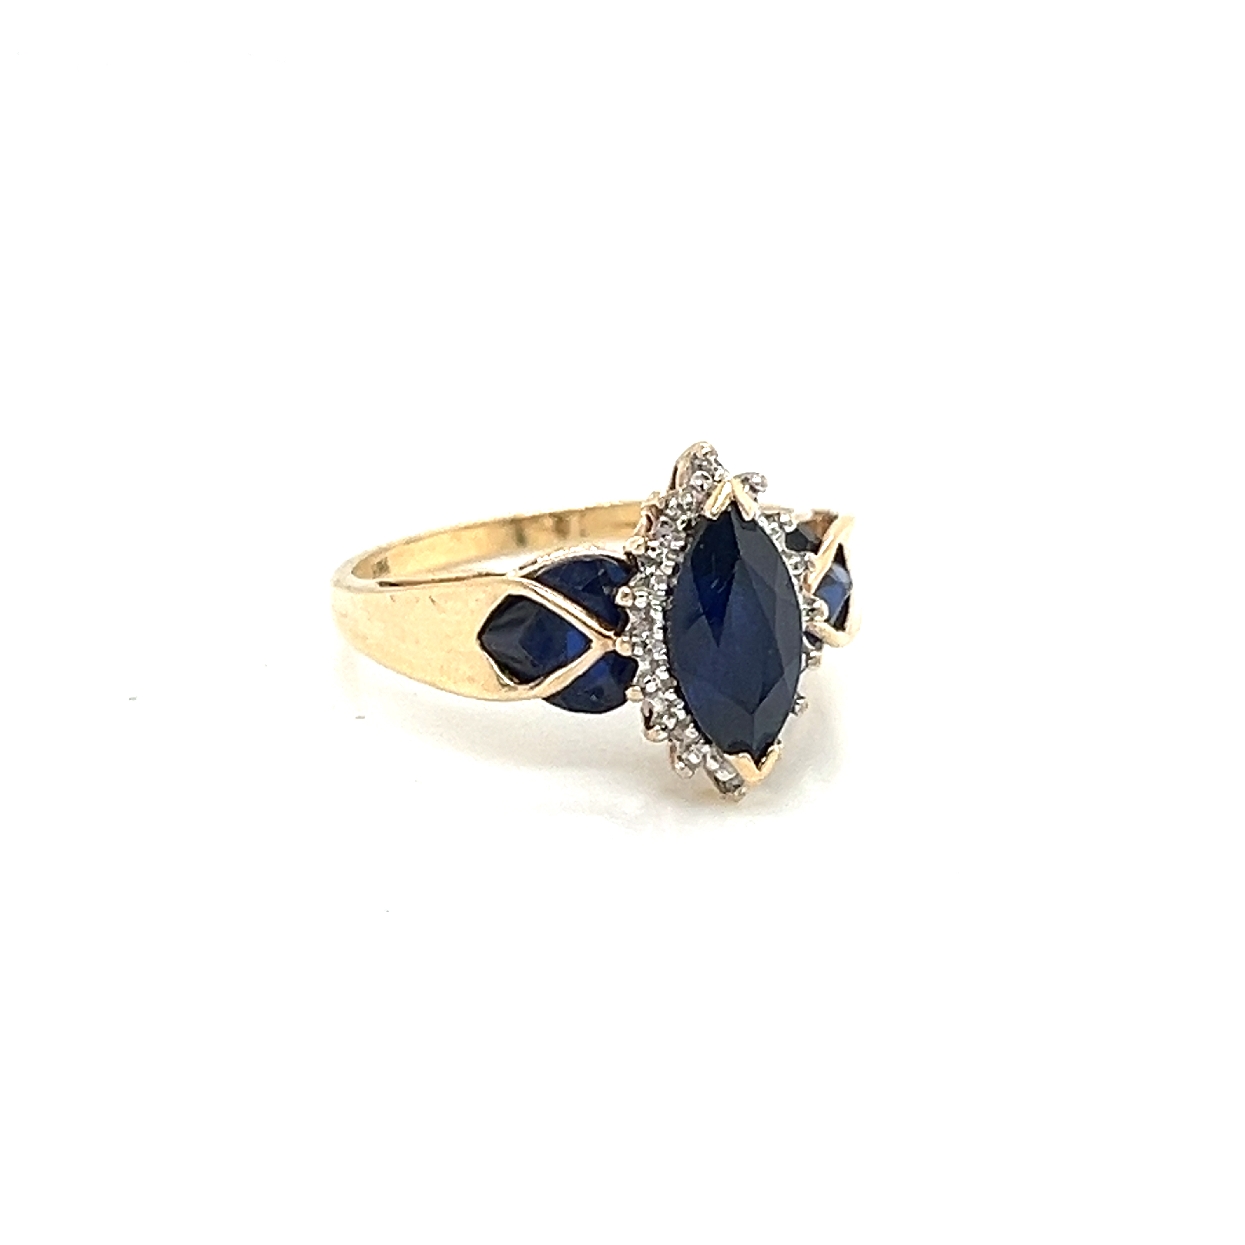 14K Yellow Gold Ring with Marquise Sapphire and Diamond Halo Size 6.75